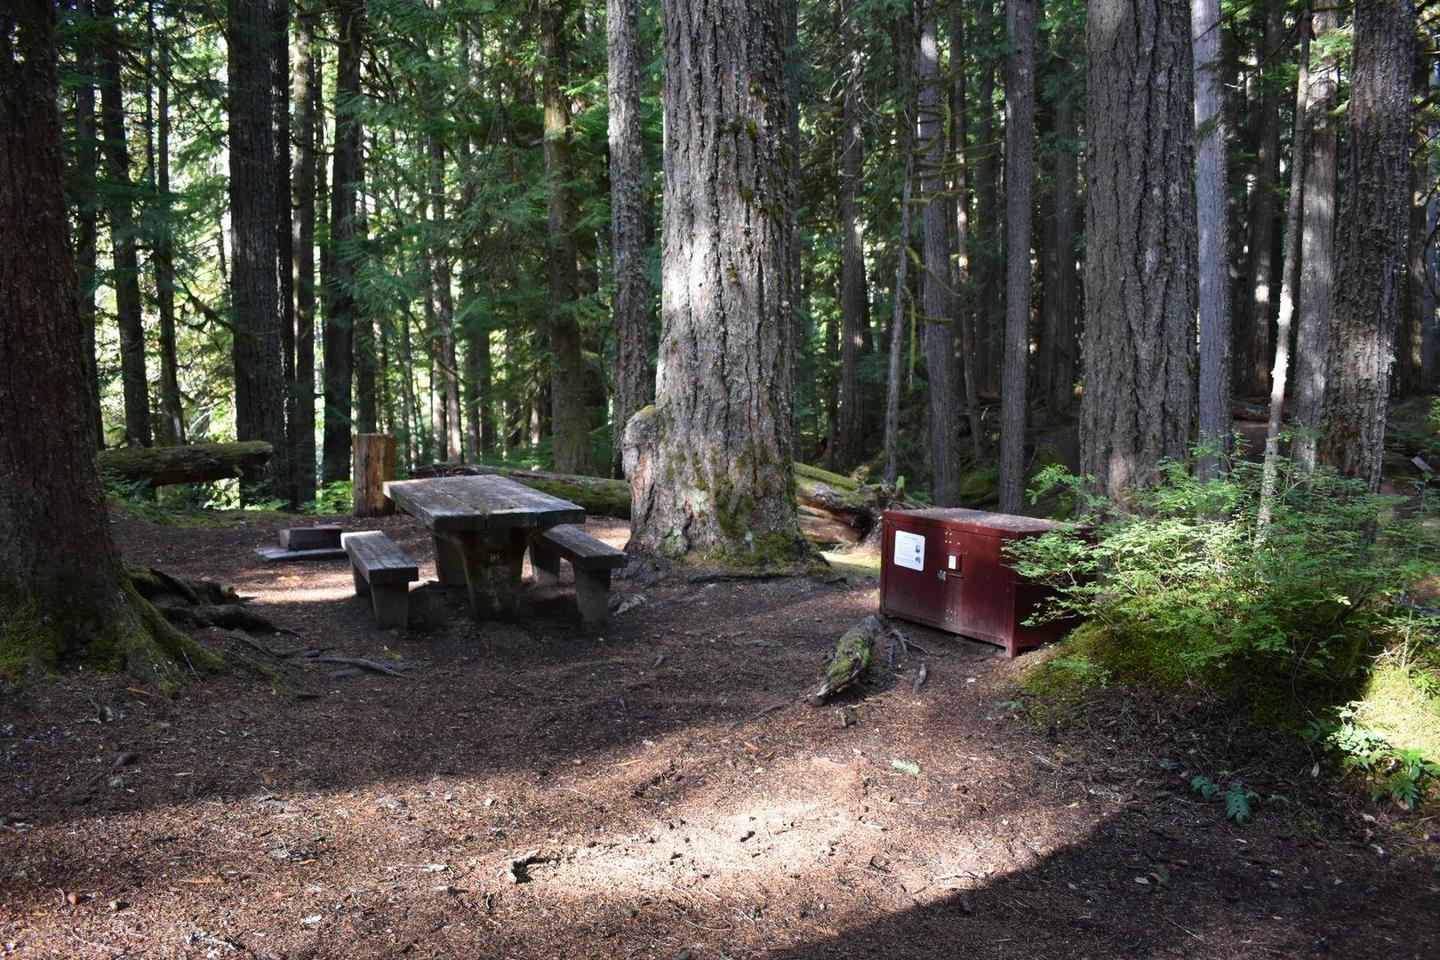 Ohanapecosh Campground - Site D008 AmenitiesCampers are provided with a picnic table, food storage box, and fire pit.